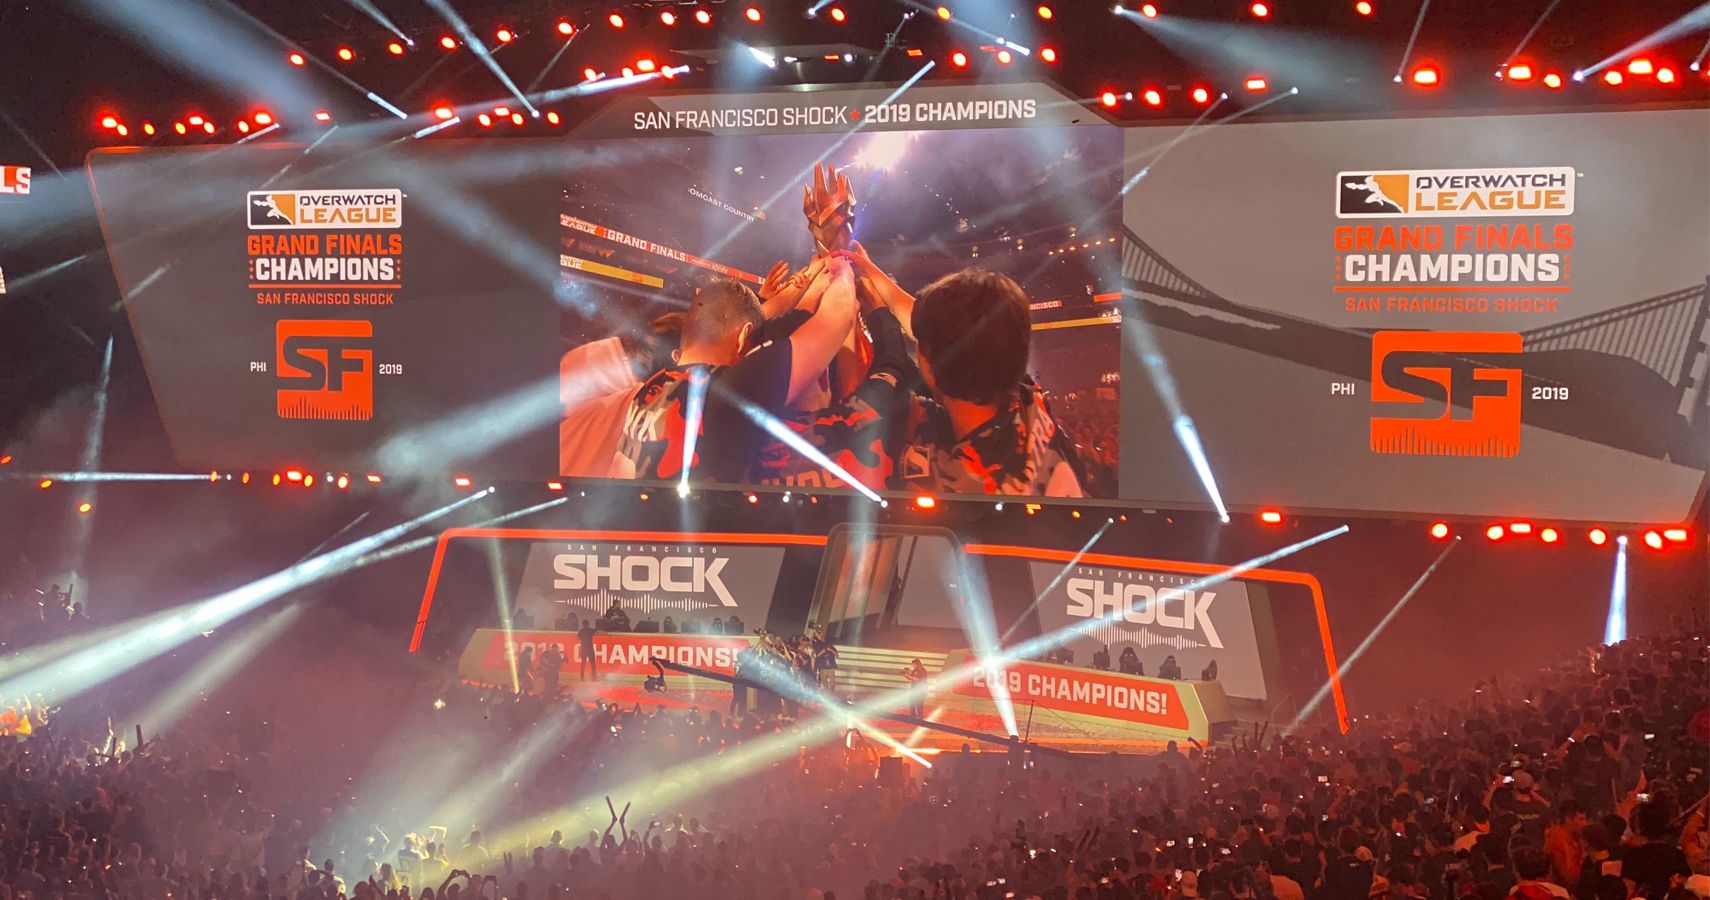 A celebratory light show after the SF Shock win the Overwatch League Grand Finals Championship.